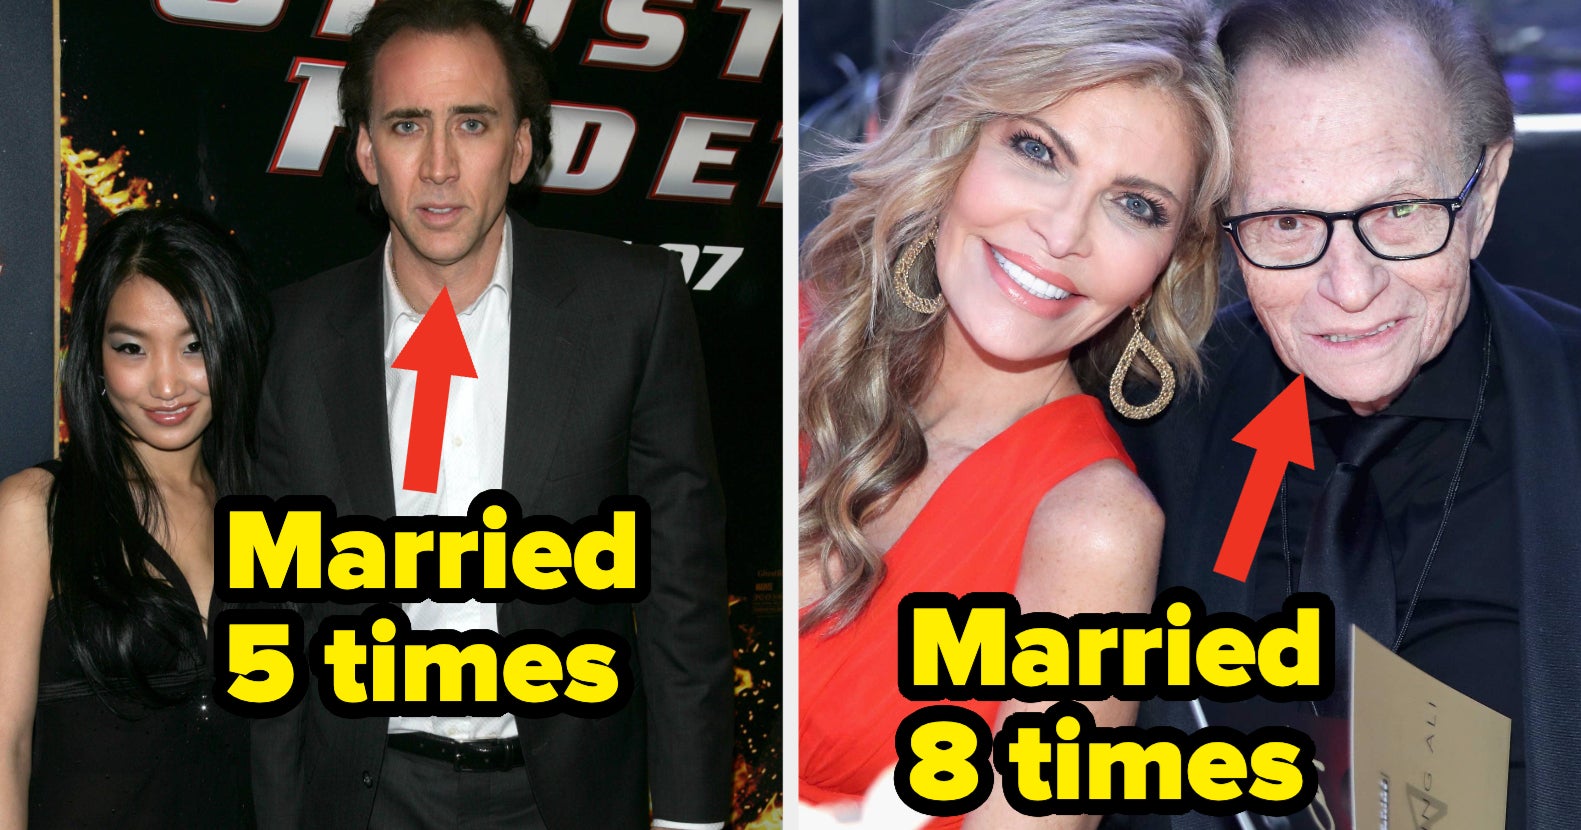 13 Famous Men Who Have Been Married And Divorced Way, Way, Way More Than You Ever Realized